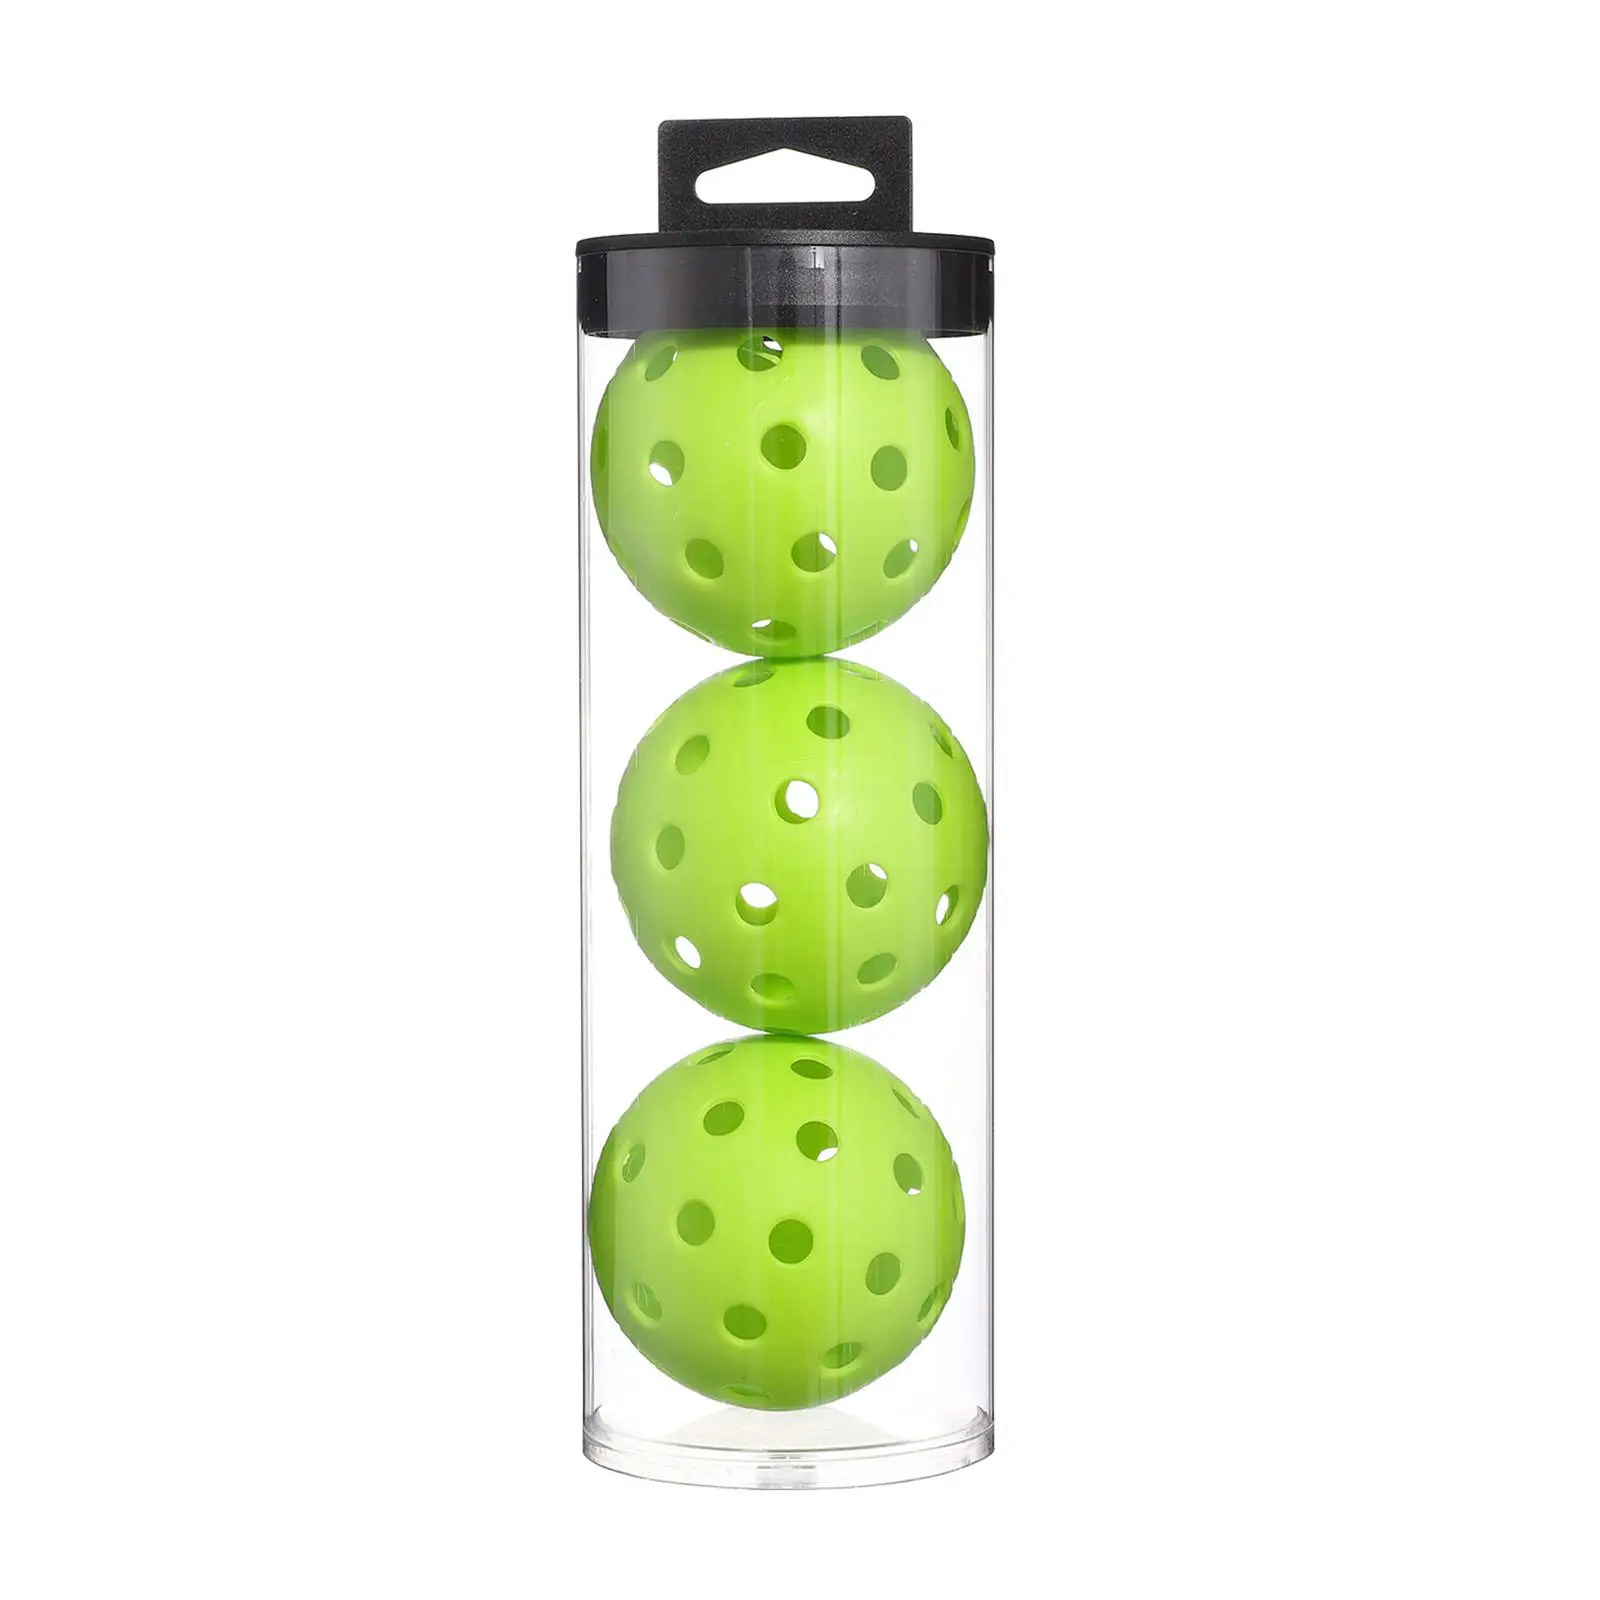 3x Pickleball Ball Pickleball Accessories for Outdoor Tournament Play Adult